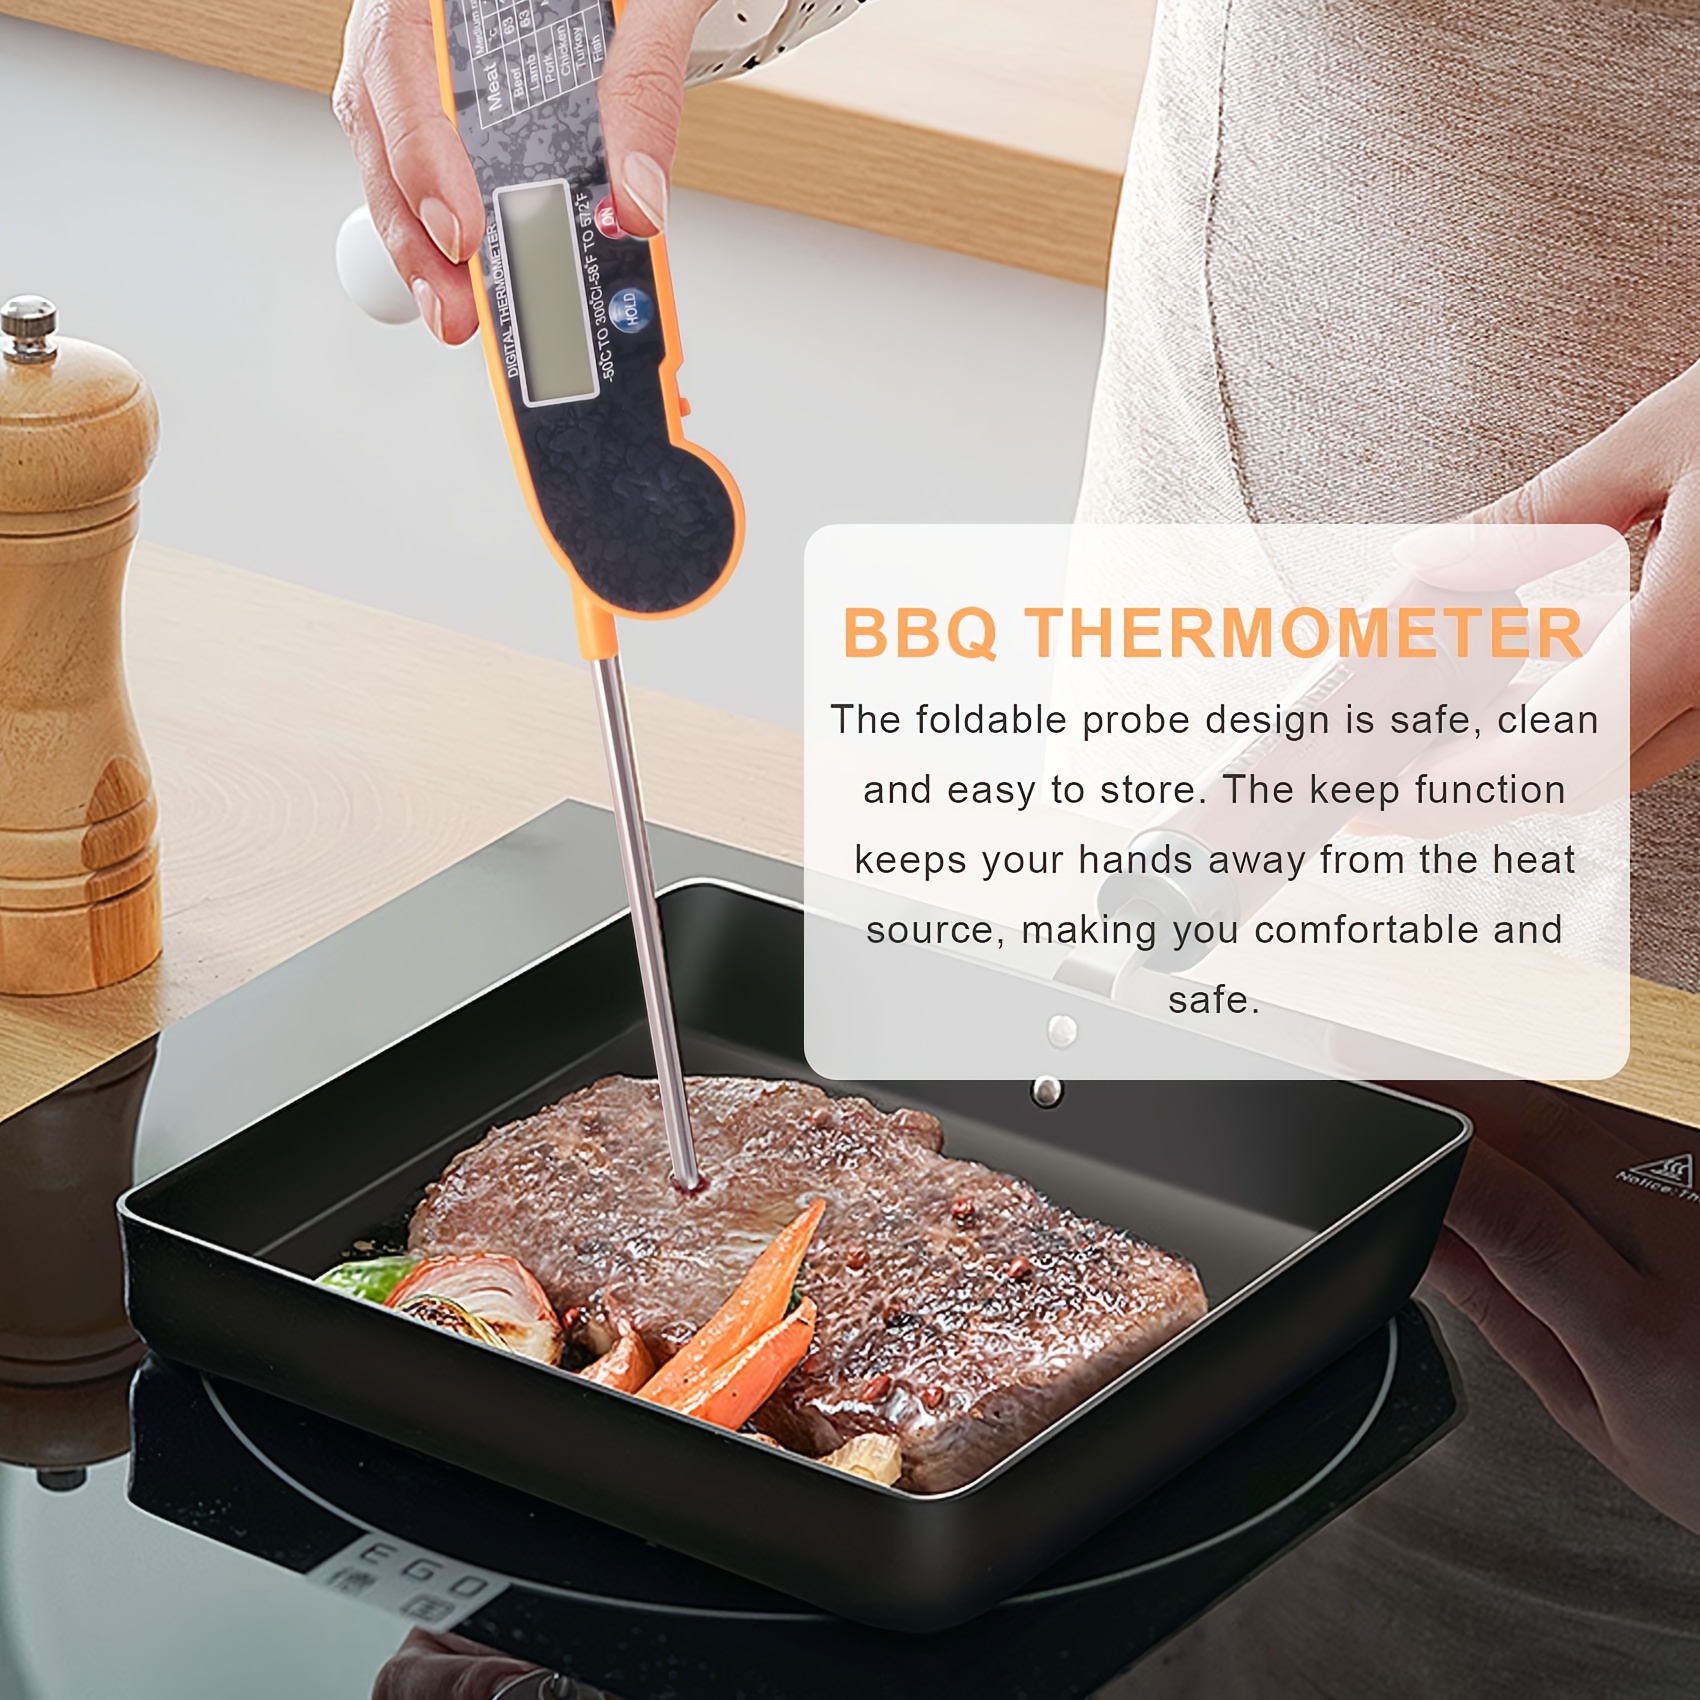 1PCS Grill Thermometer Barbecue BBQ Charcoal Smoker Temperature